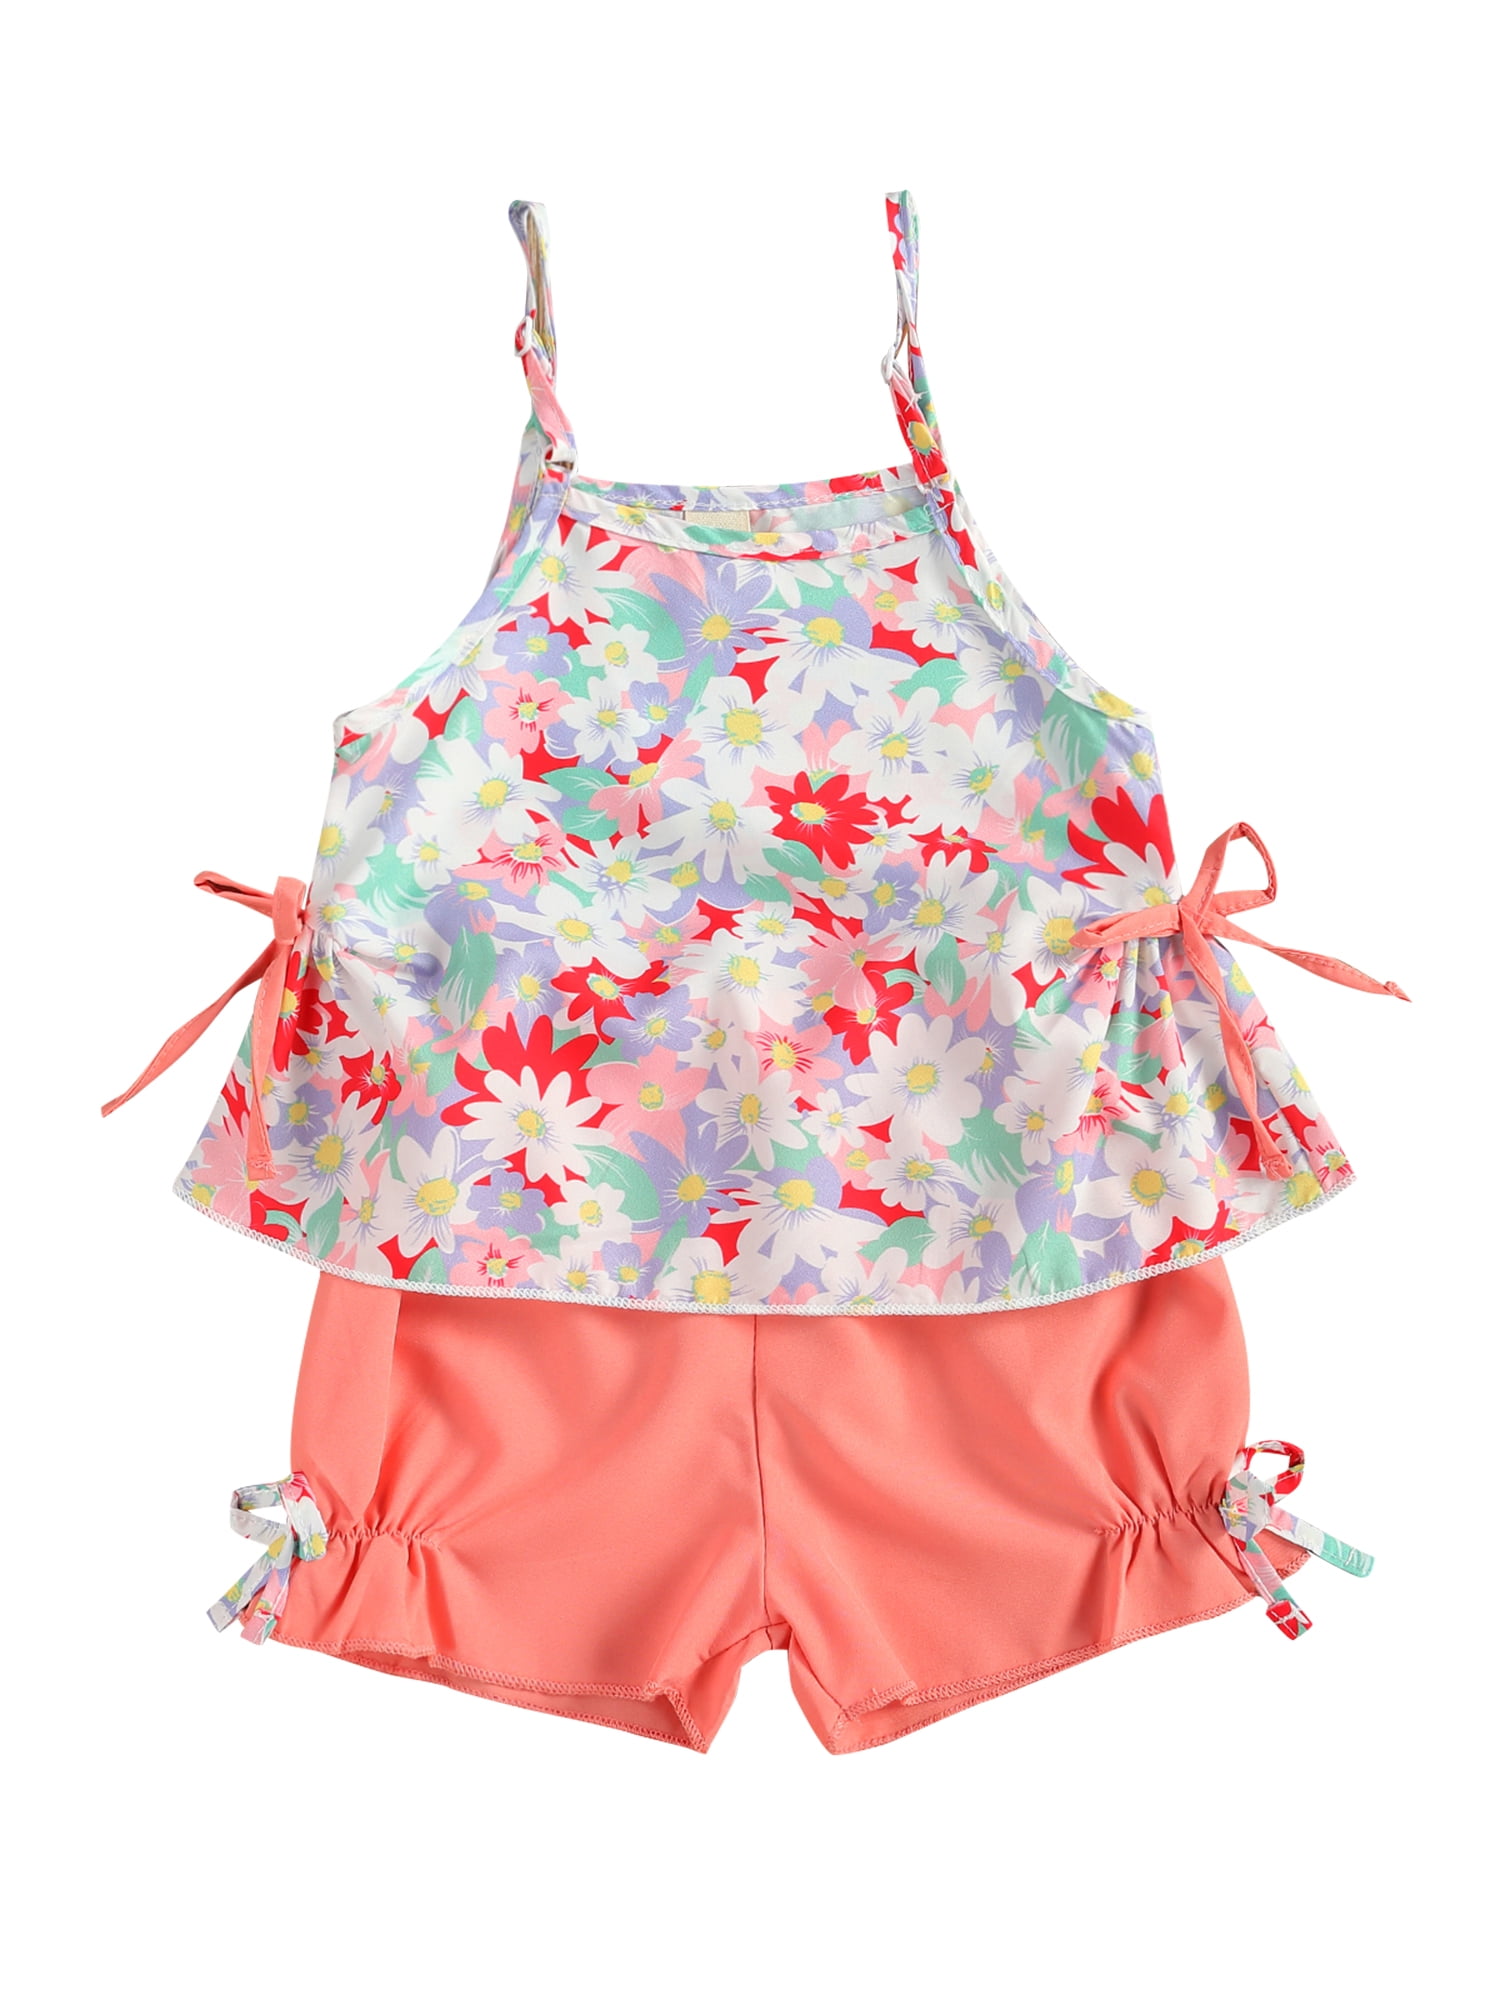 2PCS Toddler Baby Girls Floral Sleeveless Strappy Tops Floral Shorts Outfits Bandage Short Tops Set 